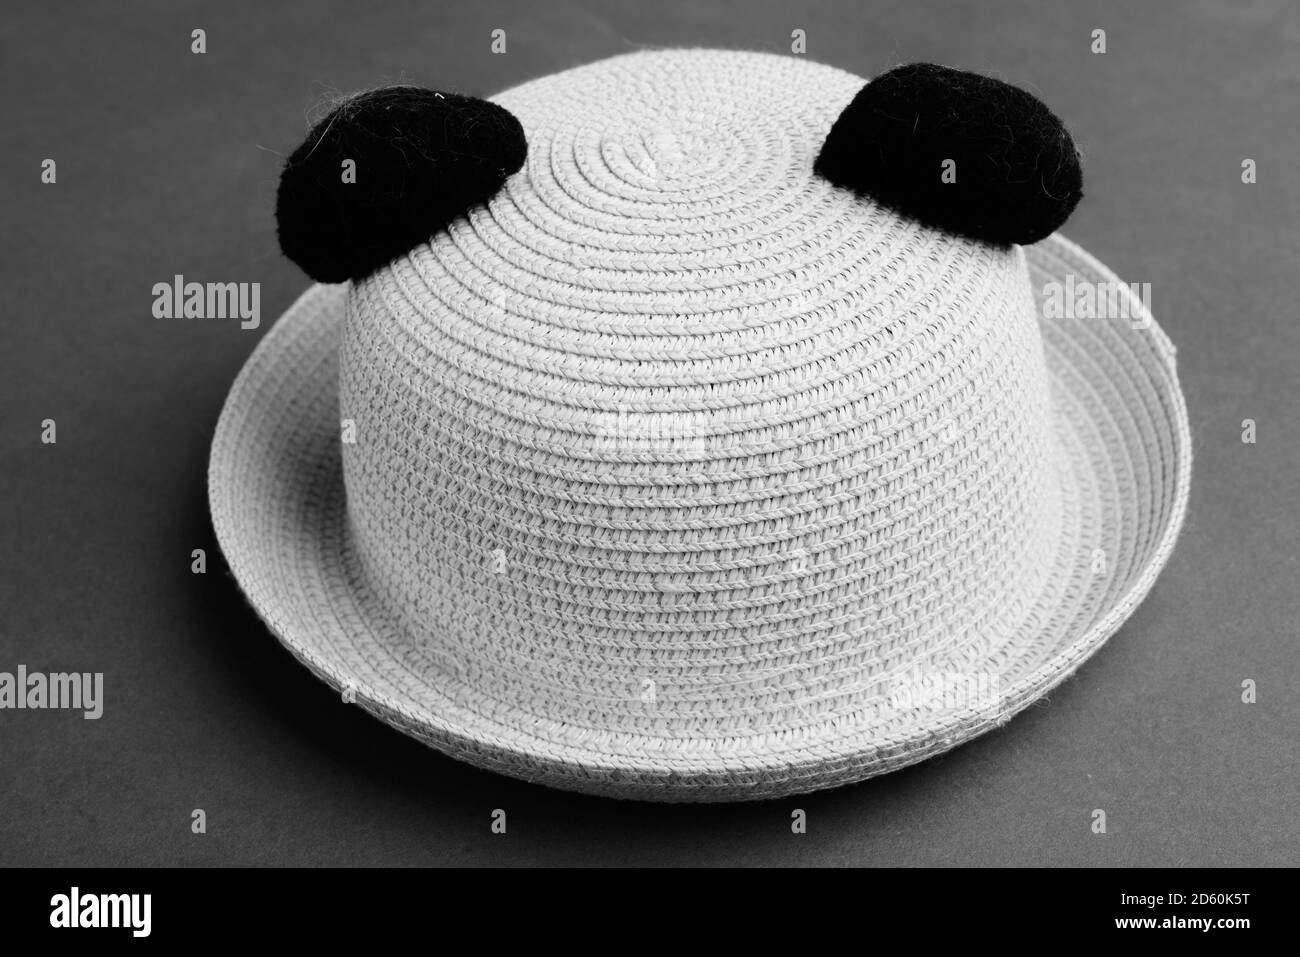 Sun Hat Against Gray Background In Black And White Stock Photo